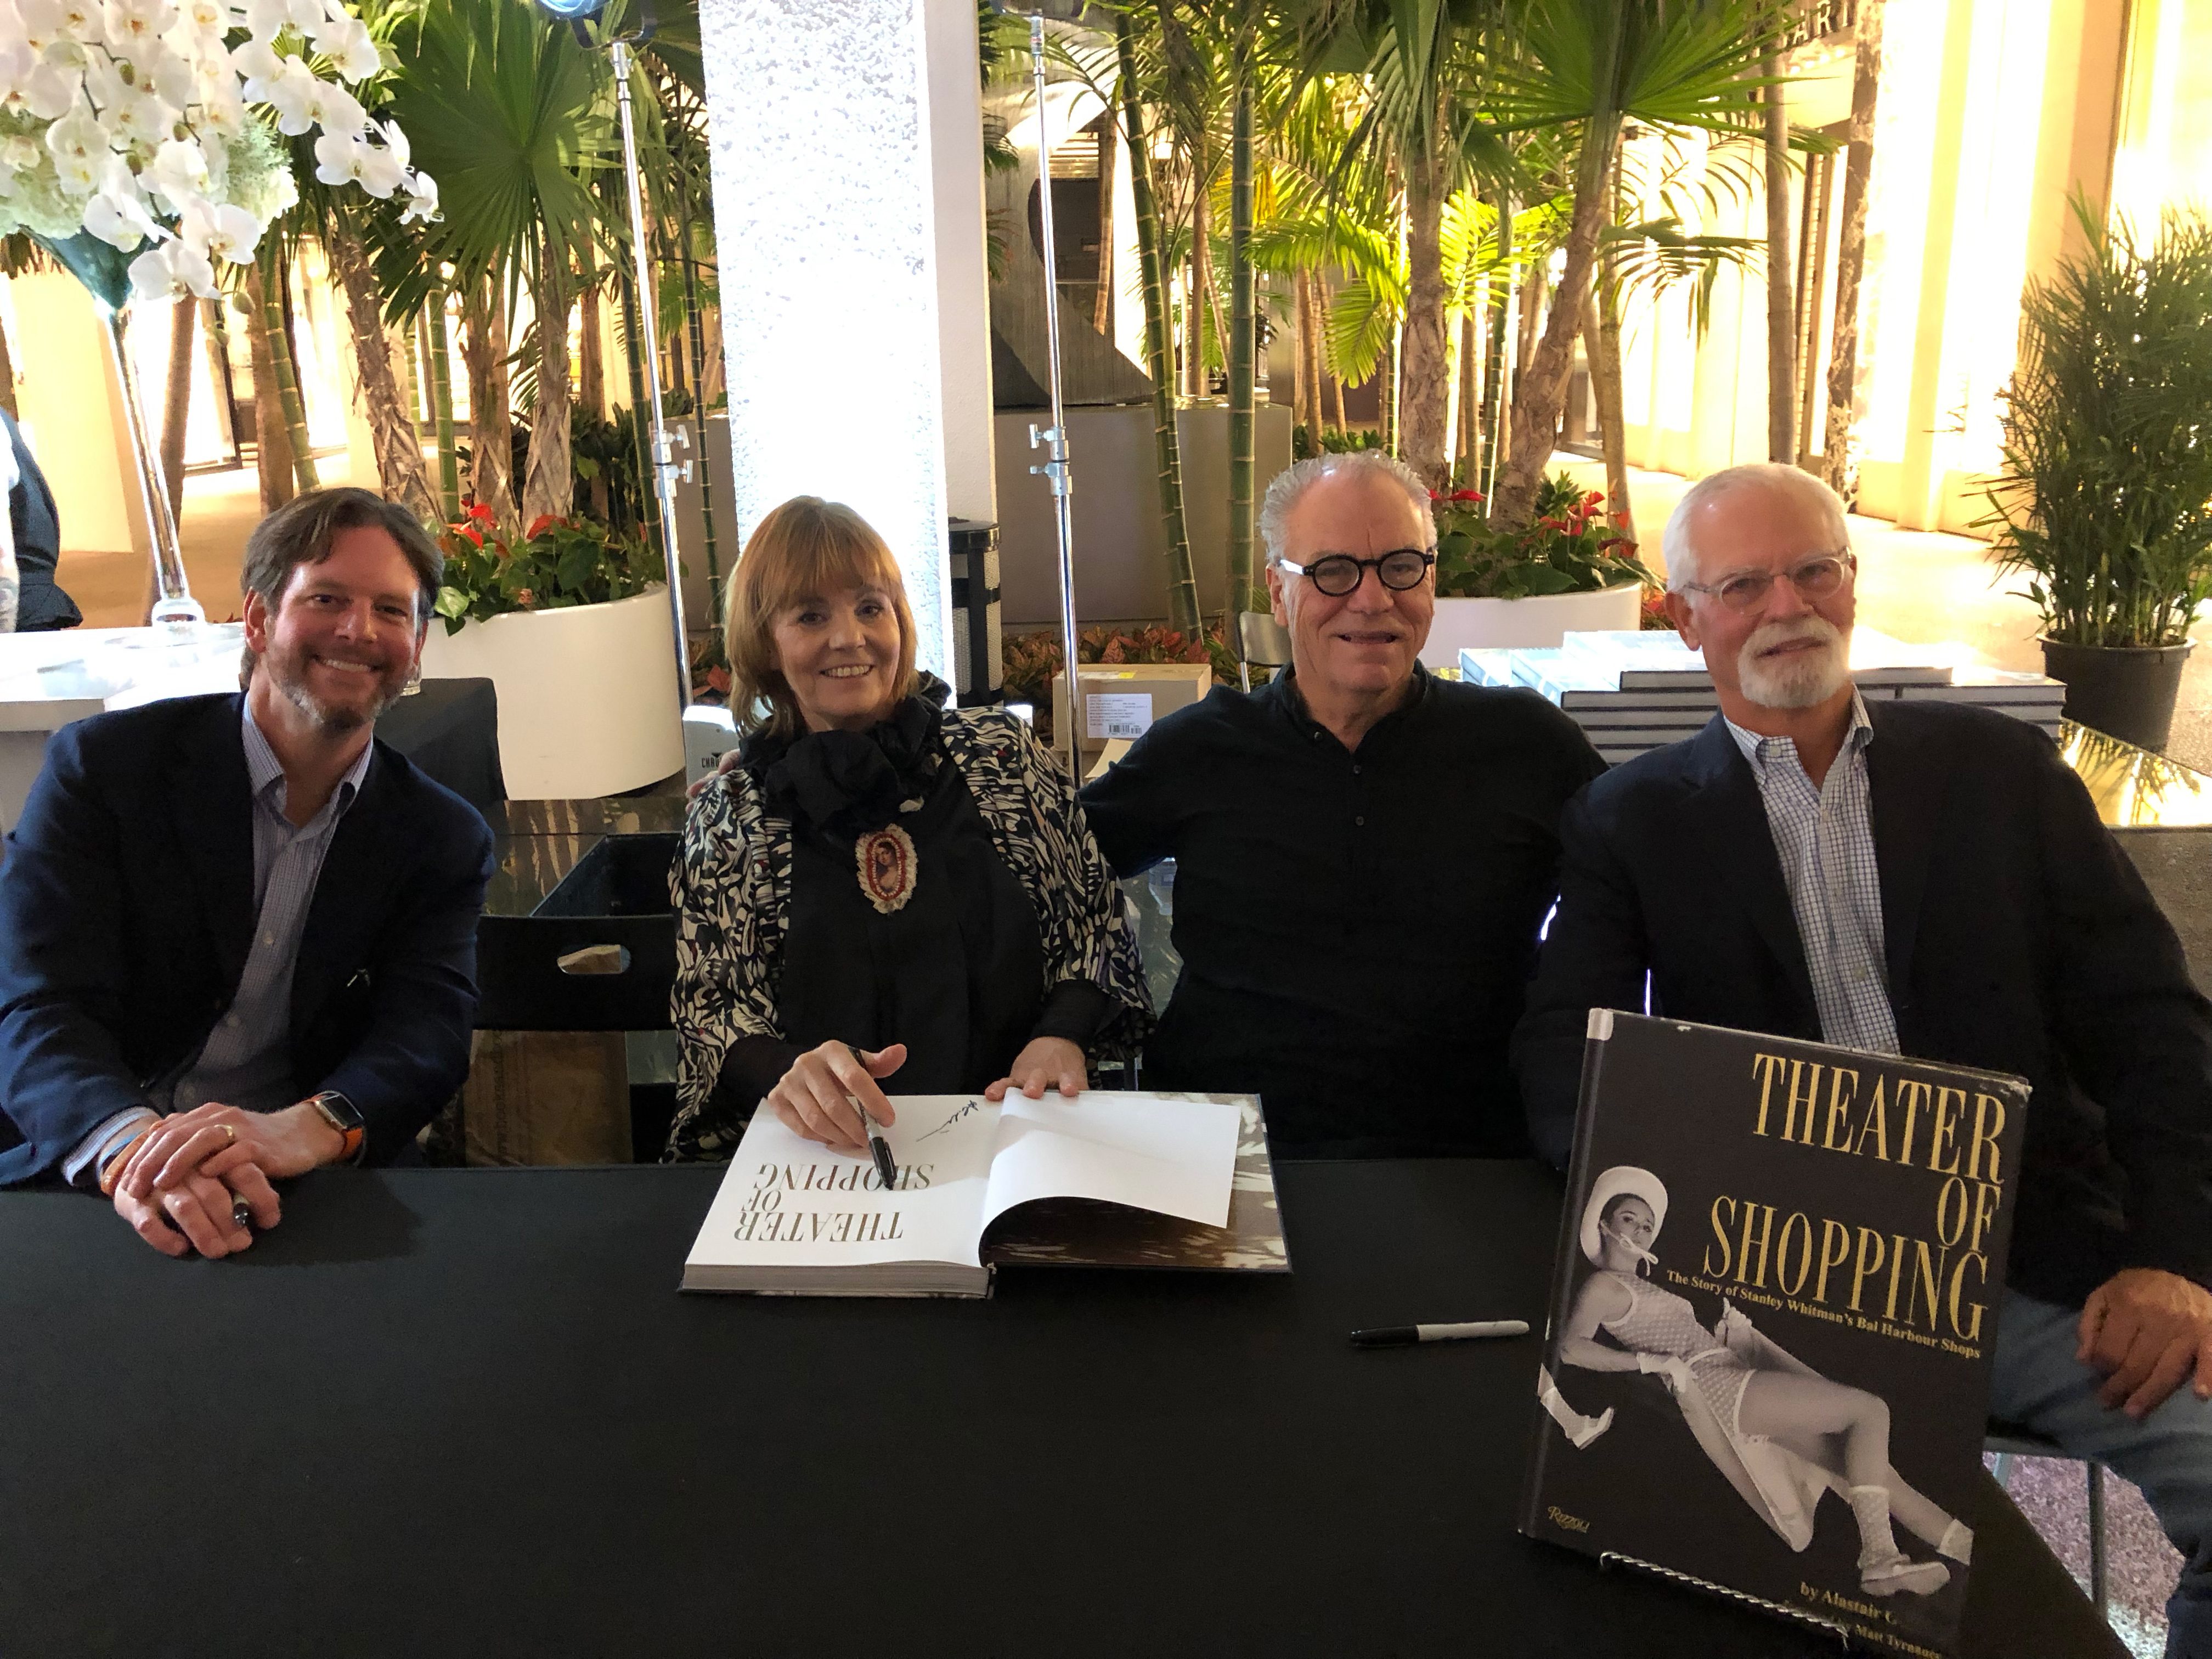 Matthew and Randy Whitman Lazenby, Barbara de Vries and Alastair Gordon signing the Rizzoli Theater of Shopping book